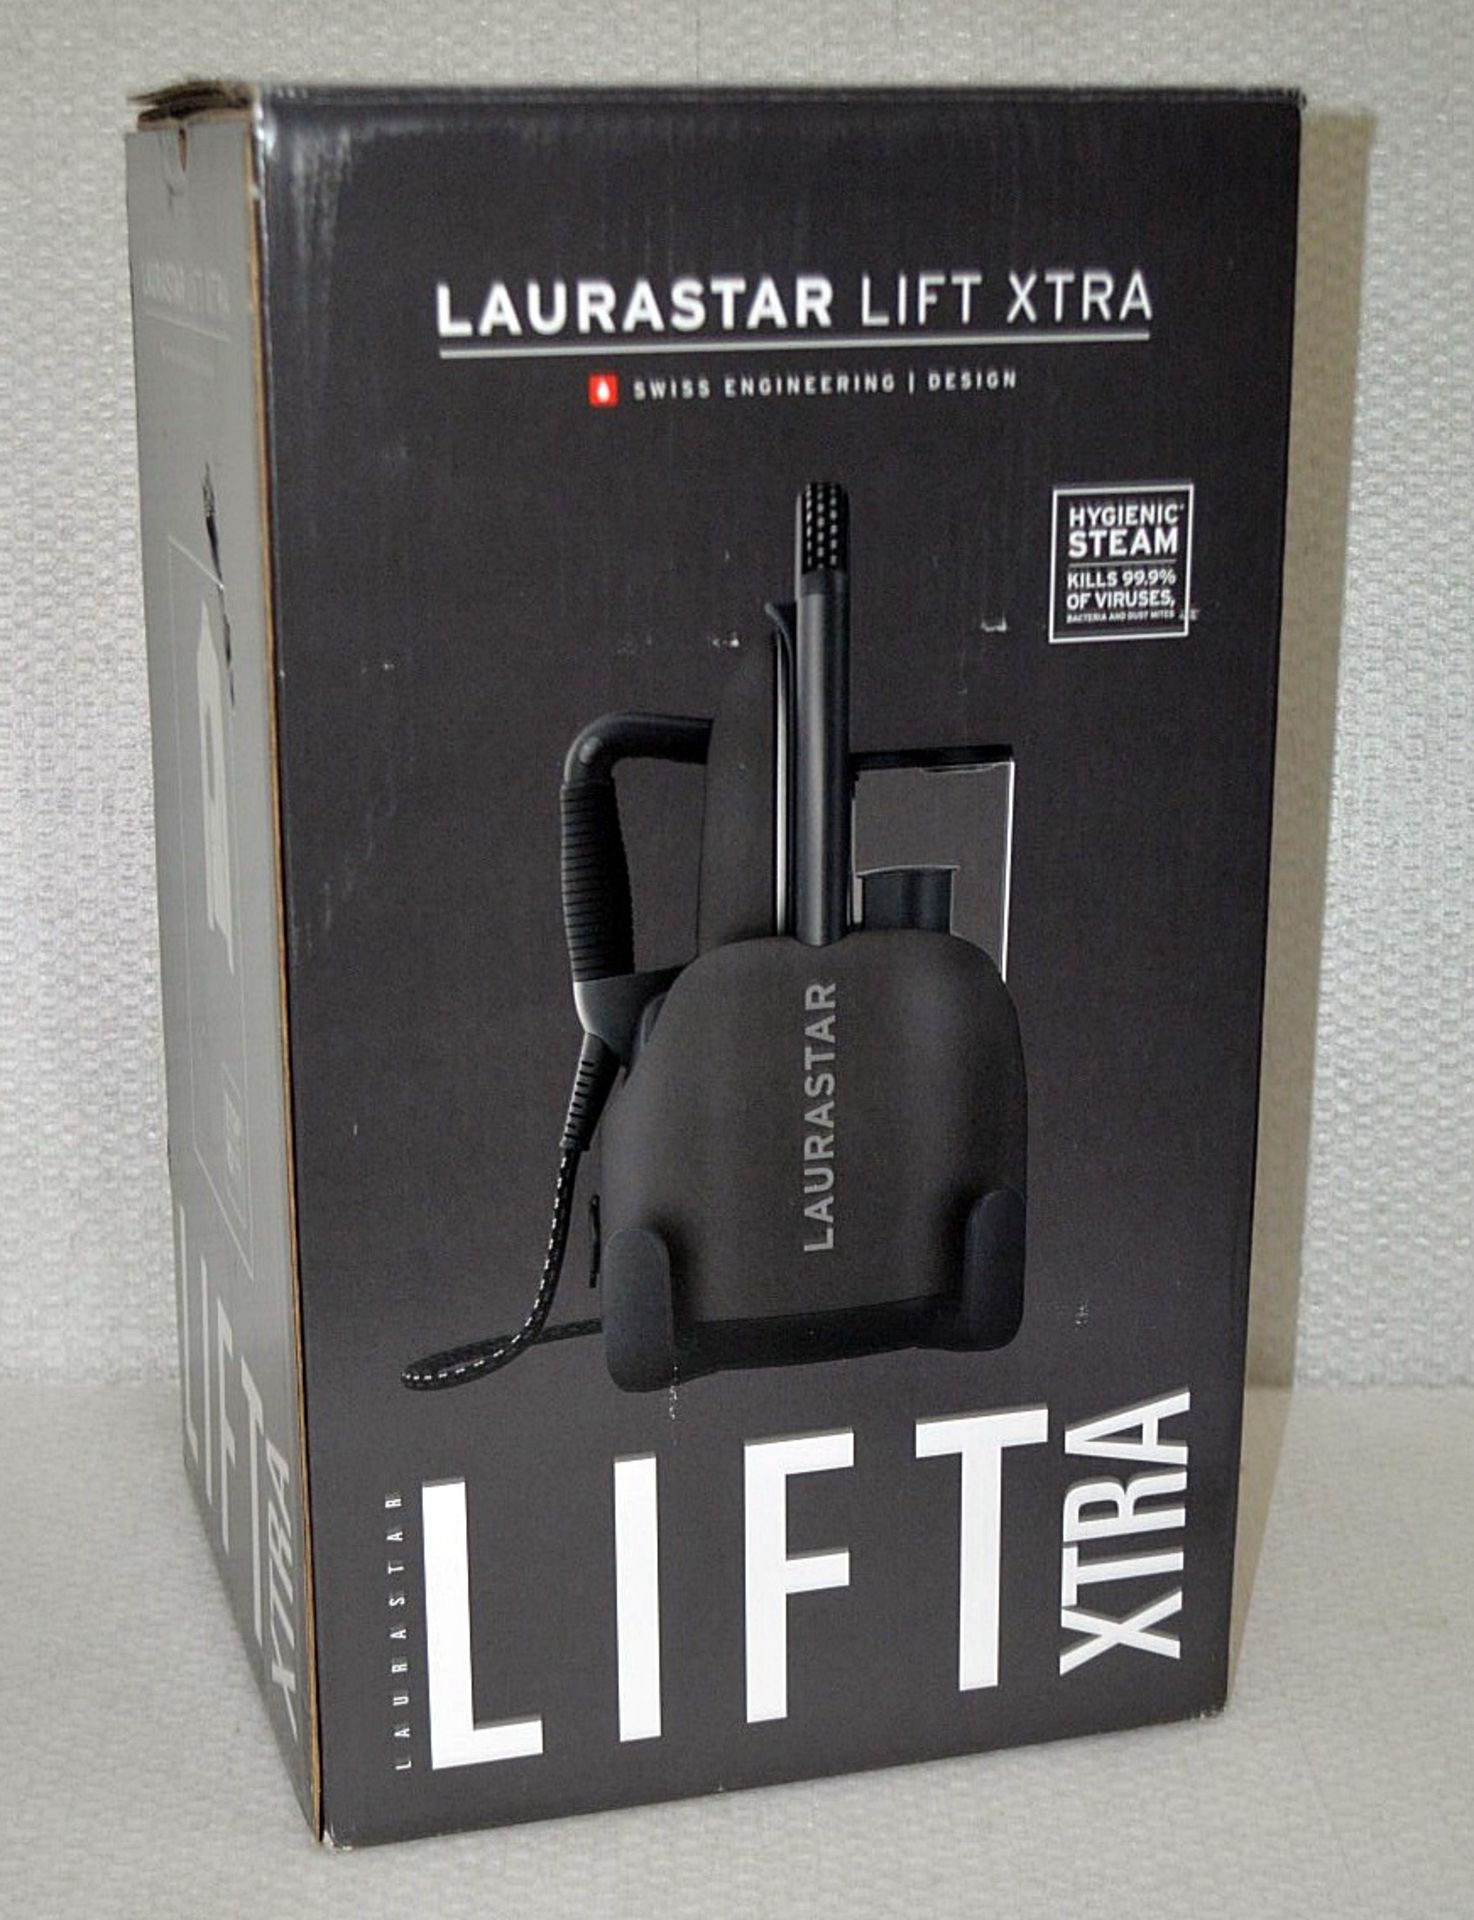 1 x Laurastar Lift Xtra 3-in-1 Steam Generator Irons, Steams and Purifies Clothing - RRP £499.00